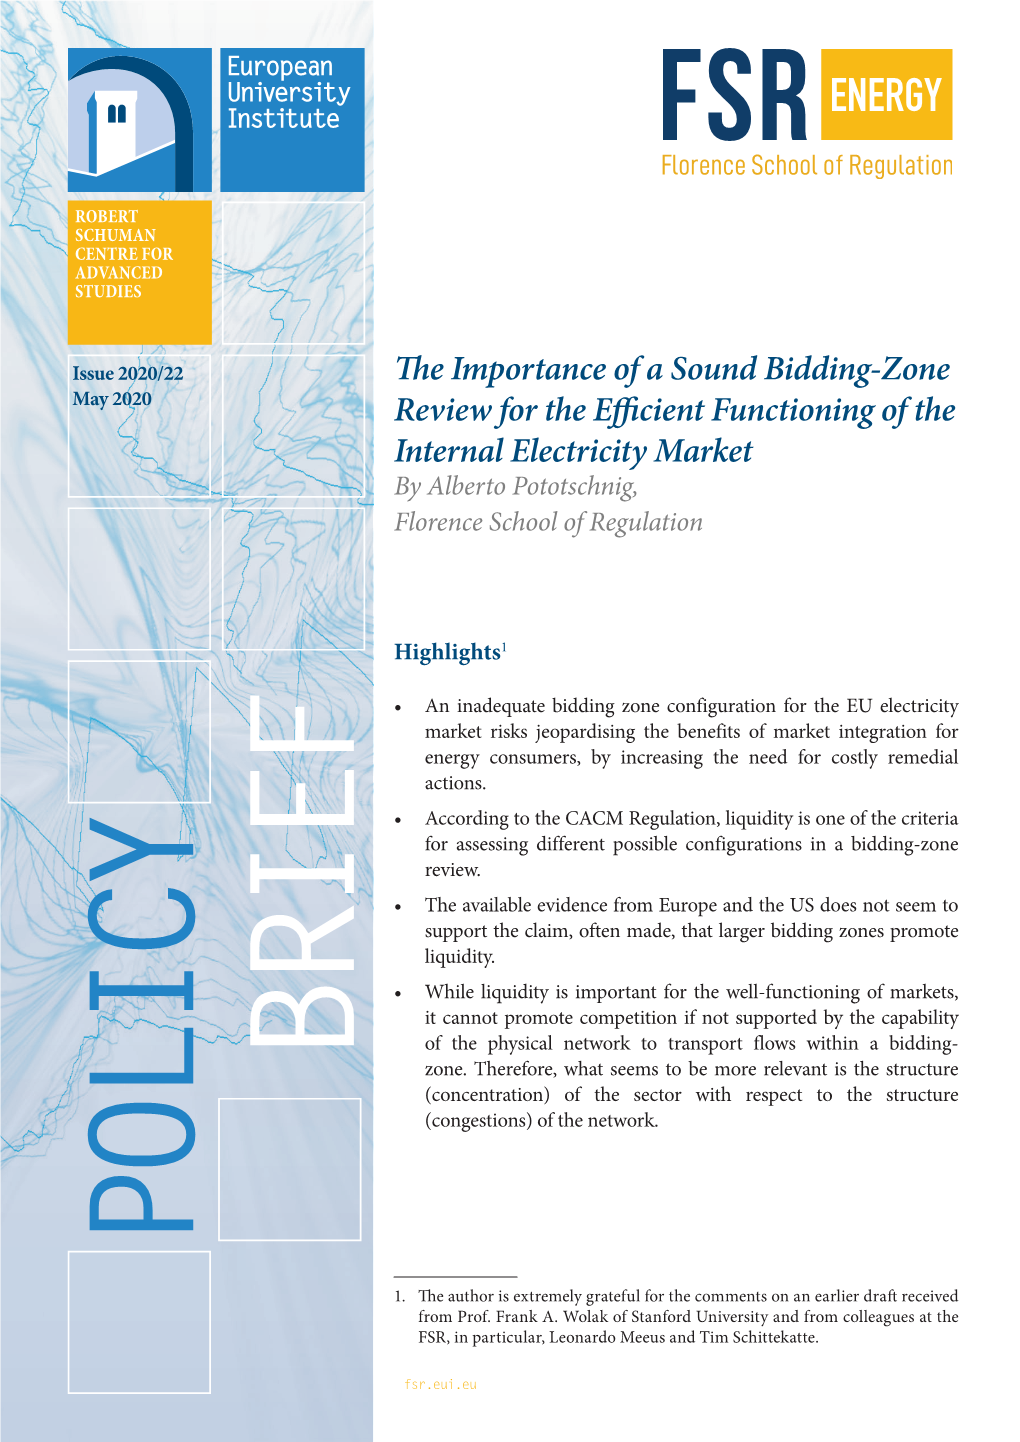 The Importance of a Sound Bidding-Zone Review for the Efficient Functioning of the Internal Electricity Market